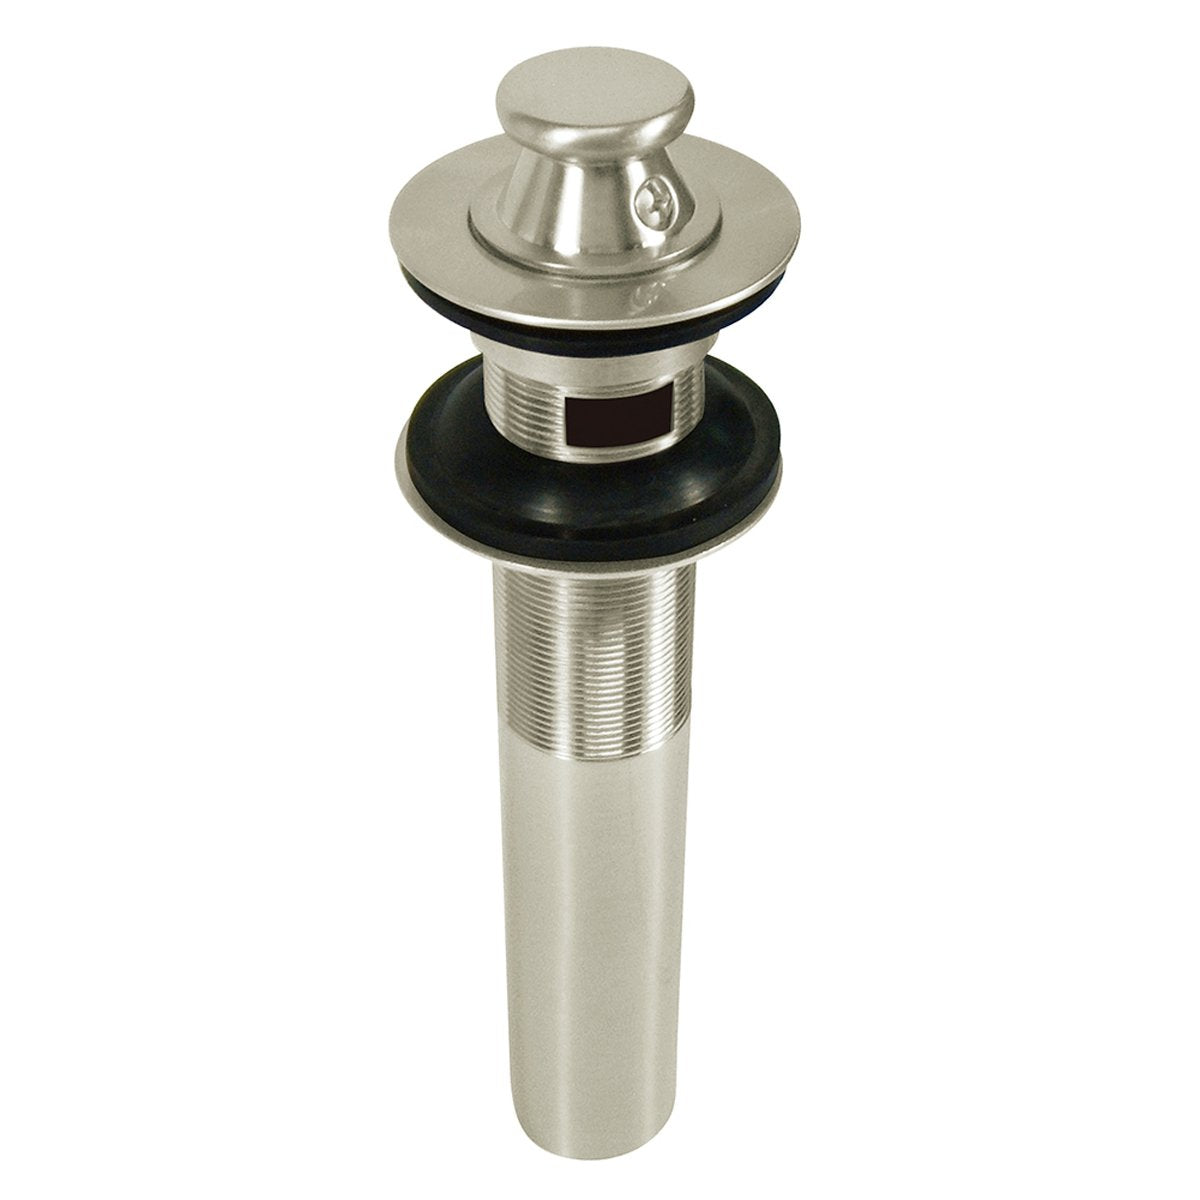 Kingston Brass Lift and Turn Sink Drain with Overflow-Bathroom Accessories-Free Shipping-Directsinks.